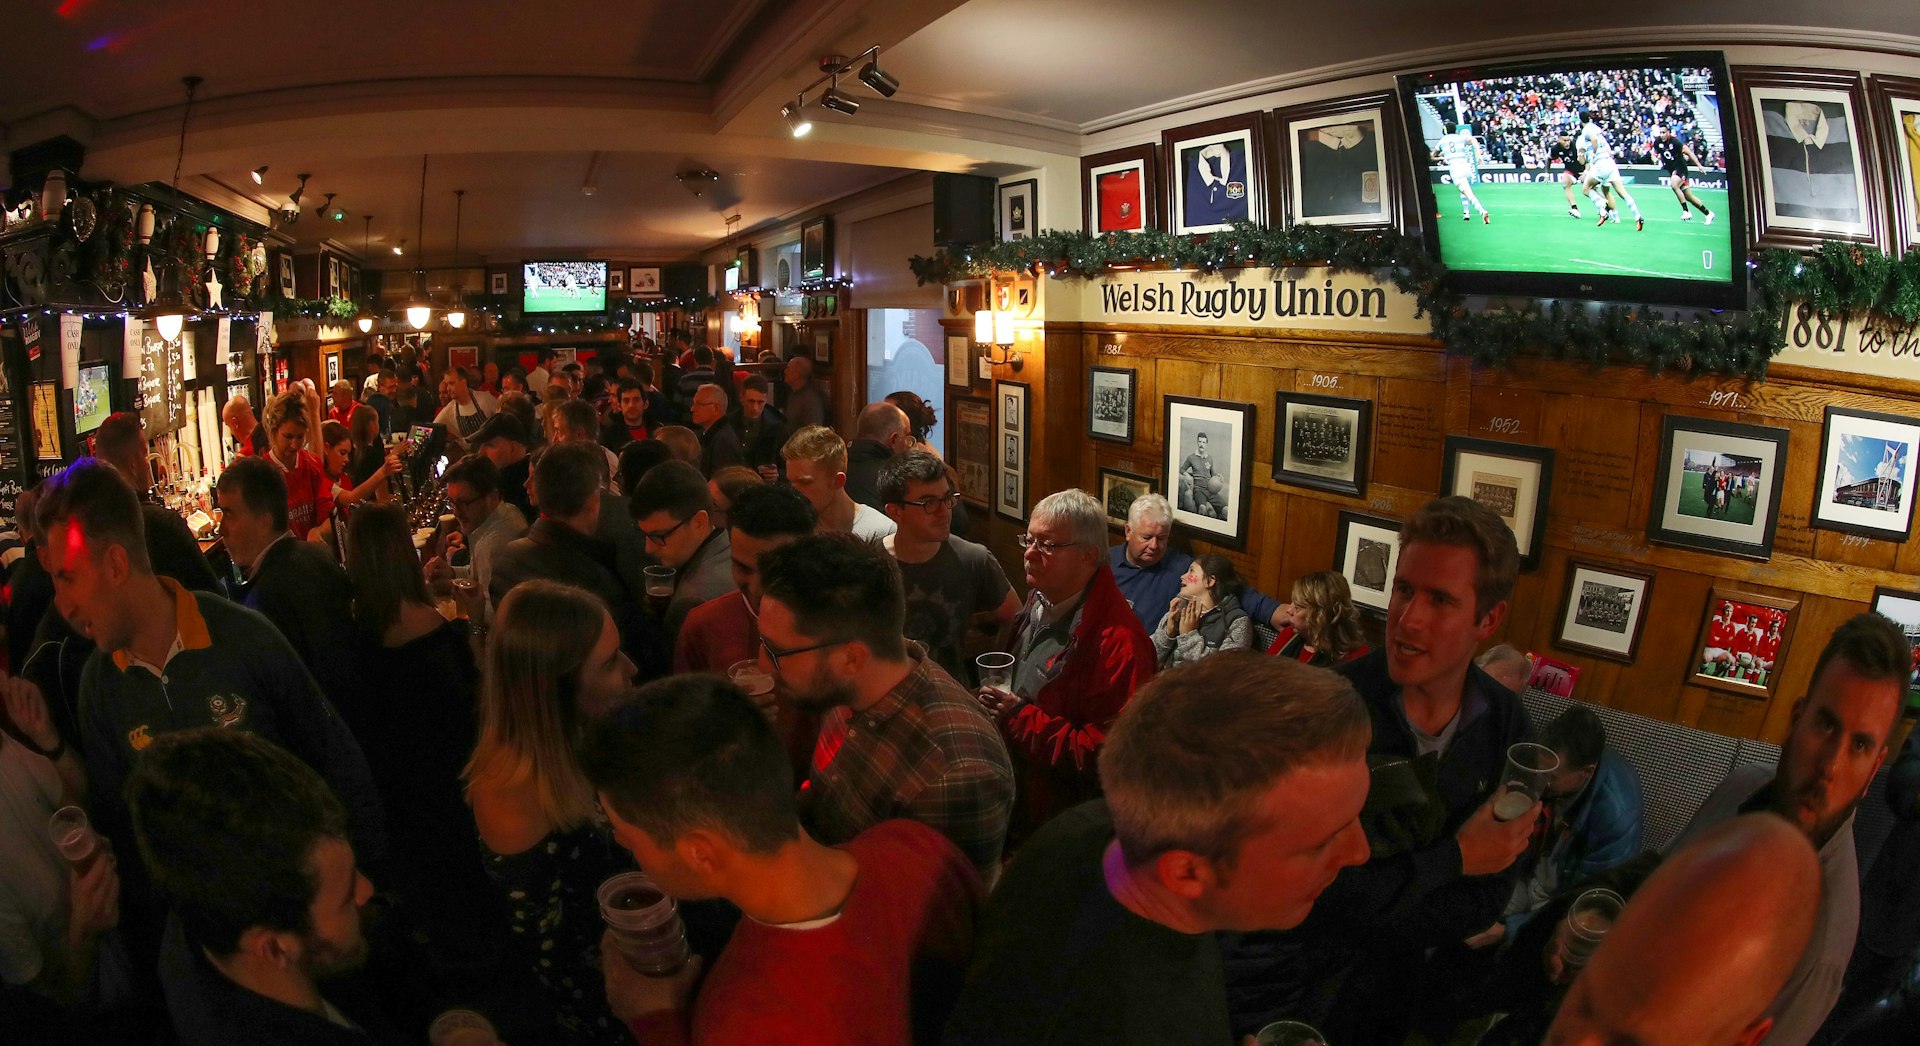 A view of the interior of Cardiff's City Arms pubs ahead of a rugby match in the city. The pub is pack full of people, most sporting red Wales rugby jerseys.